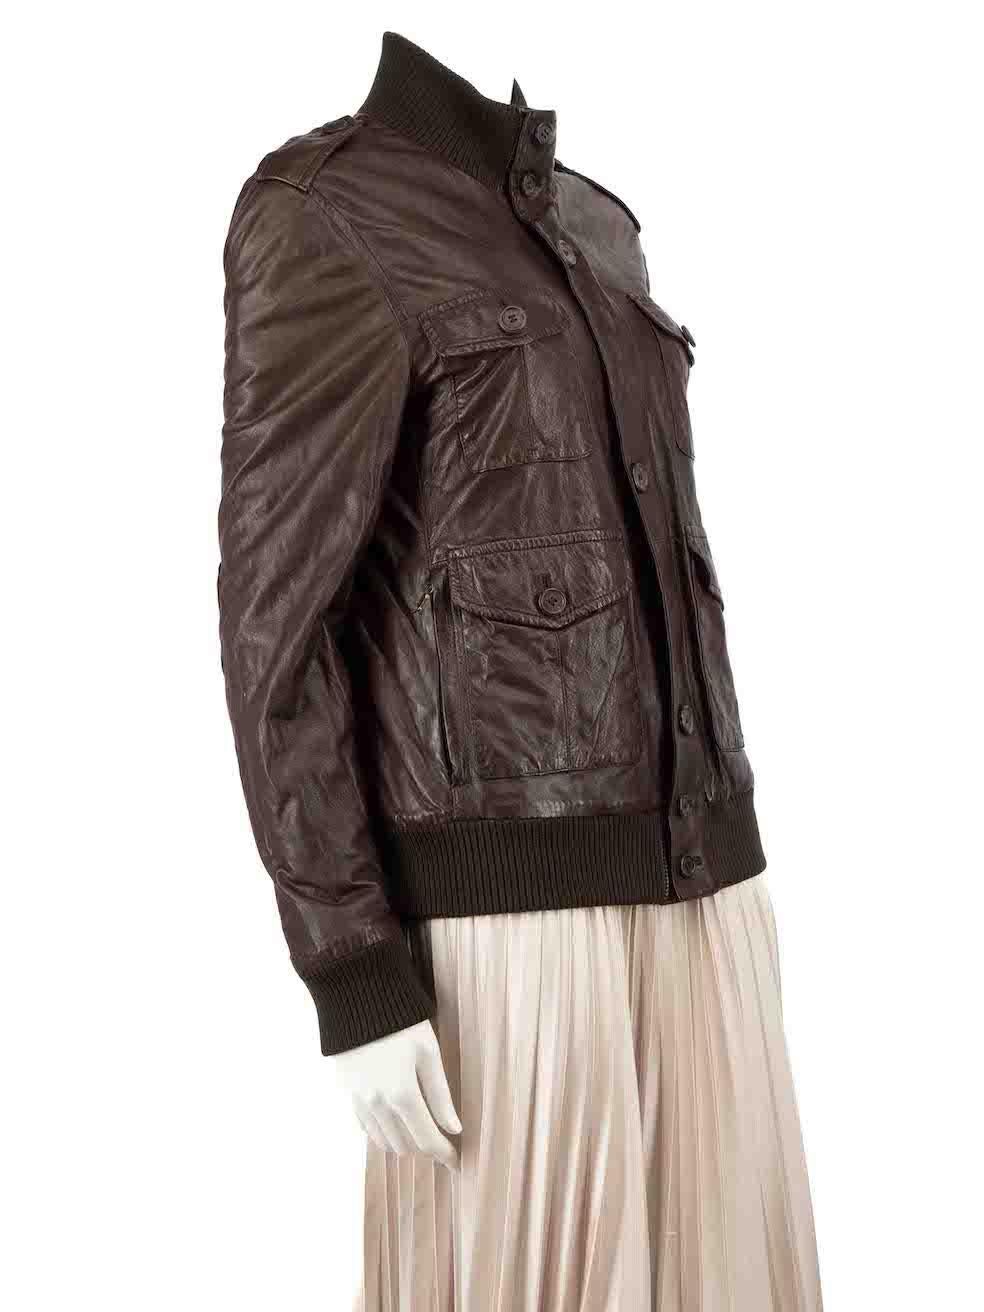 CONDITION is Very good. Minimal wear to jacket is evident. Minimal wear to the leather surface with light creasing seen throughout as well noticeable tarnishing of the hardware components on this used Prada designer resale item.
 
 Details
 Brown
